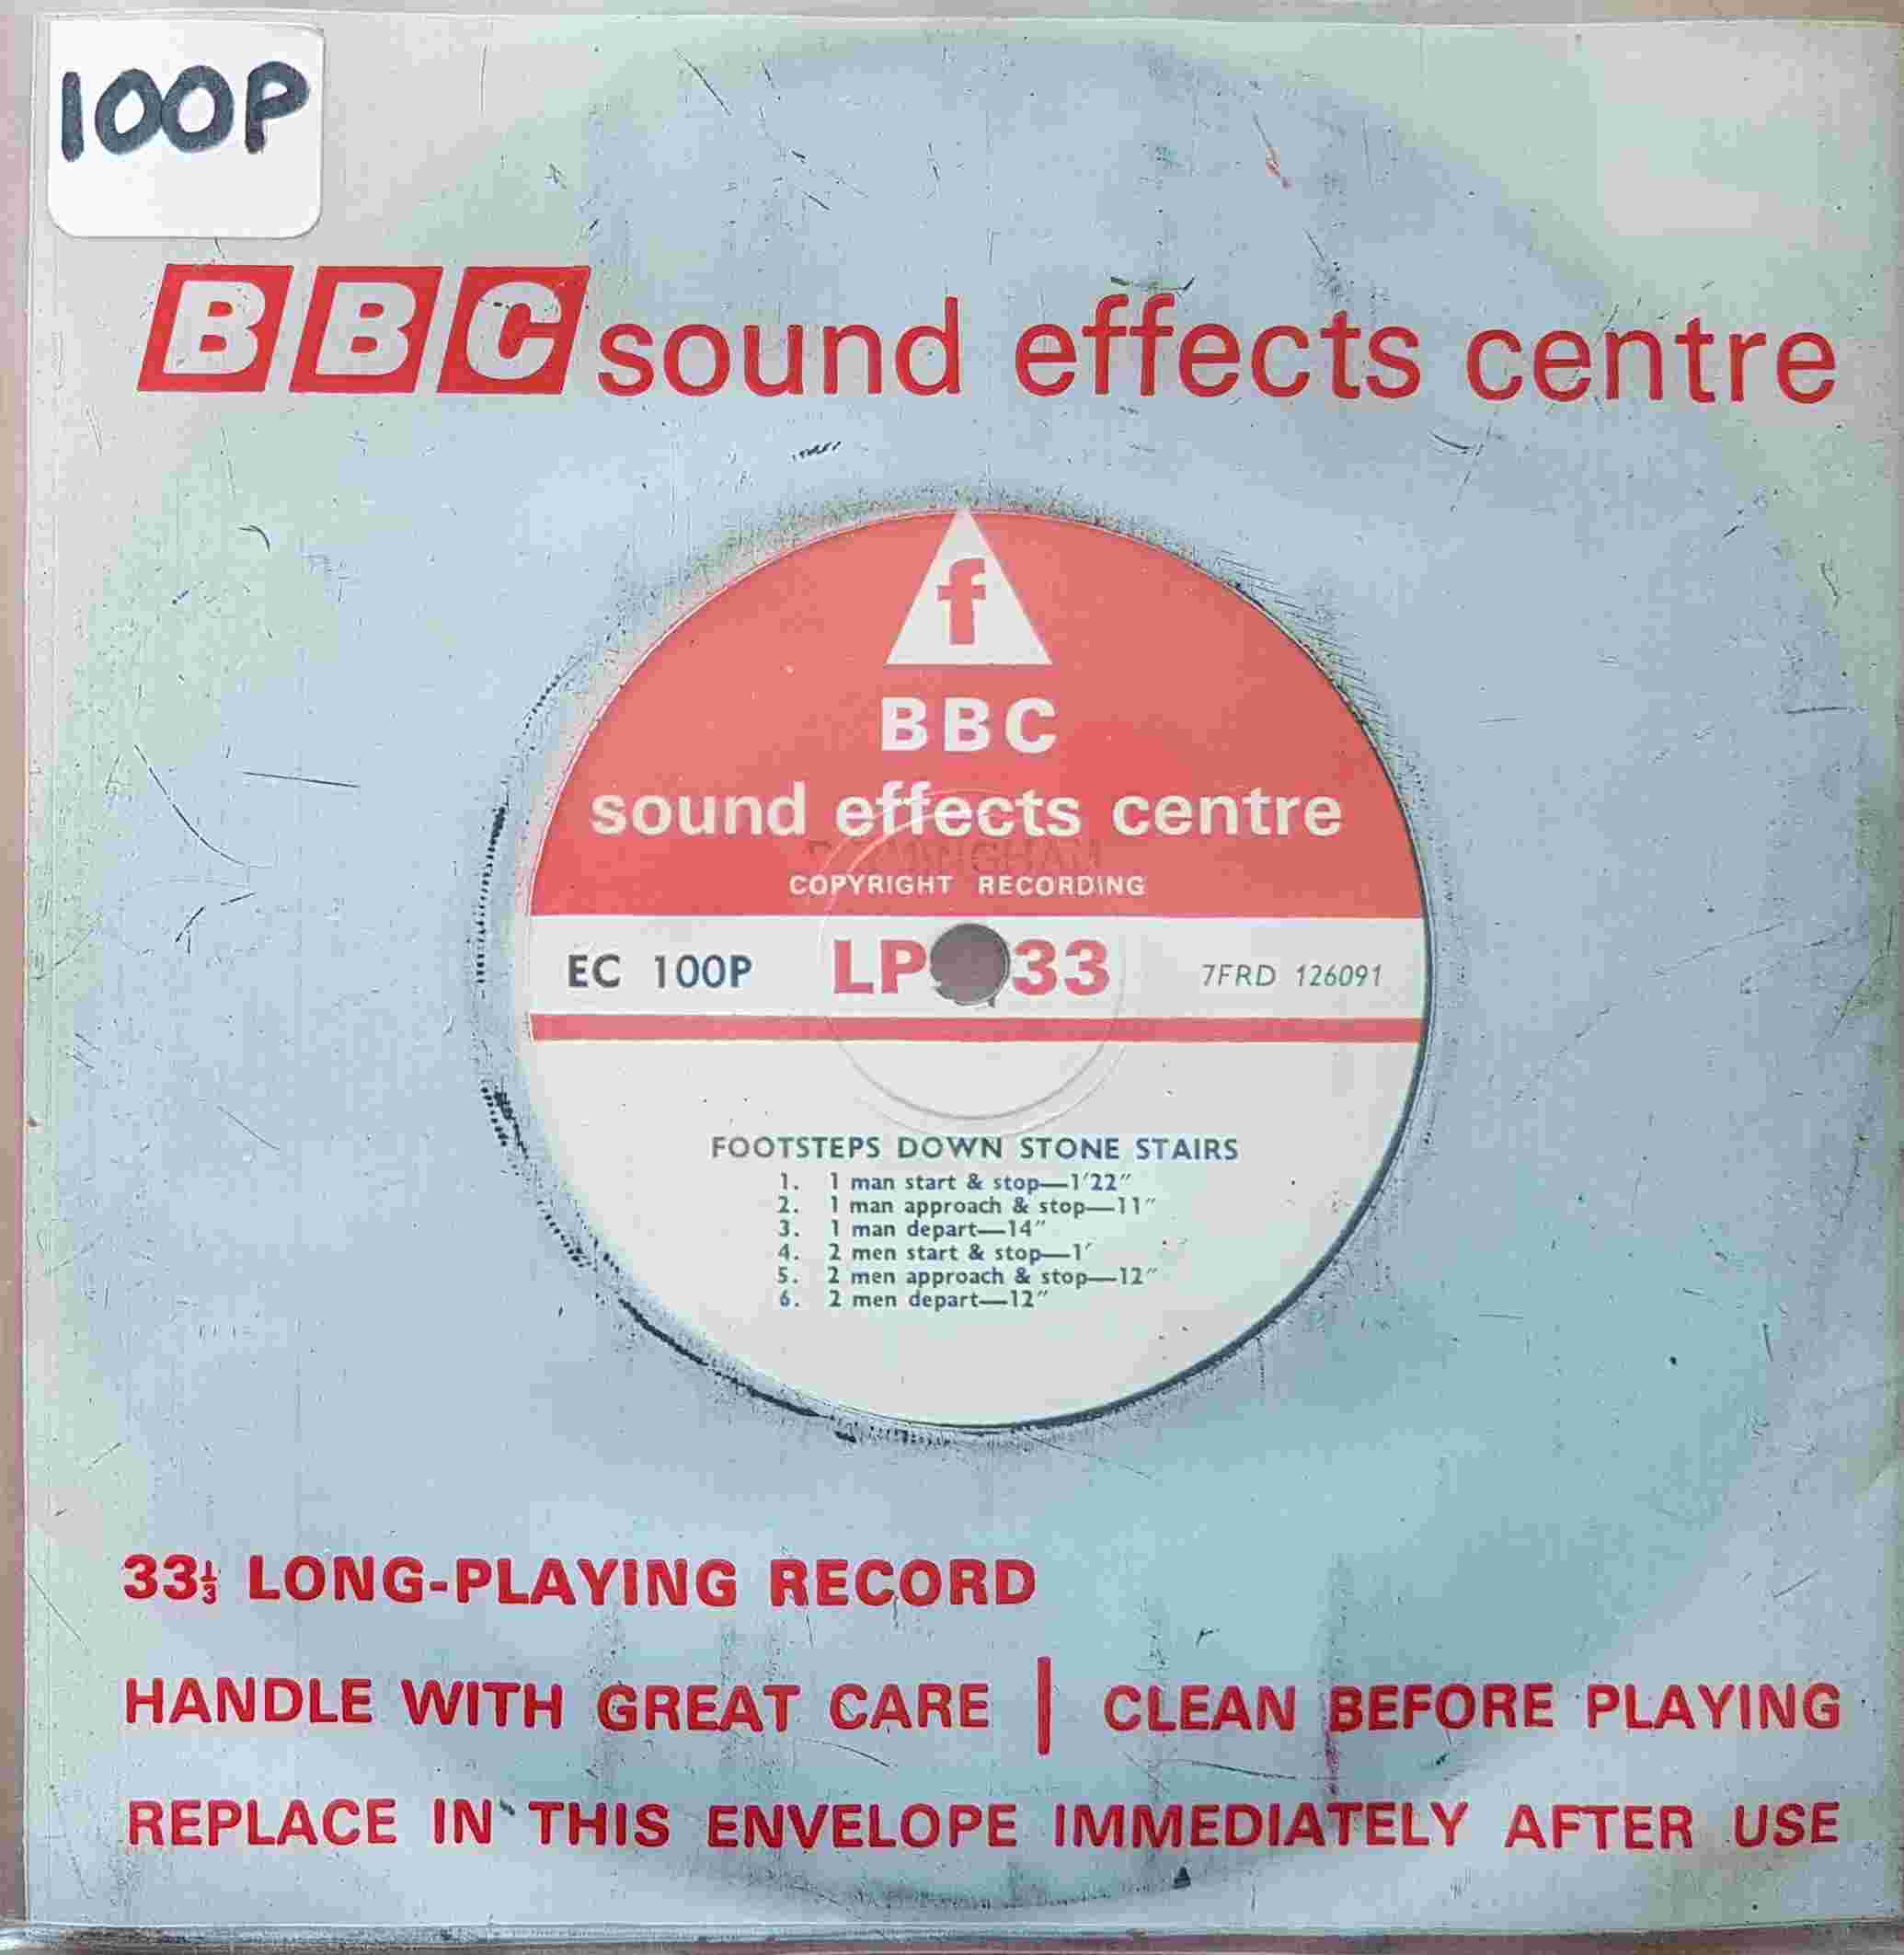 Picture of EC 100P Footsteps by artist Not registered from the BBC singles - Records and Tapes library